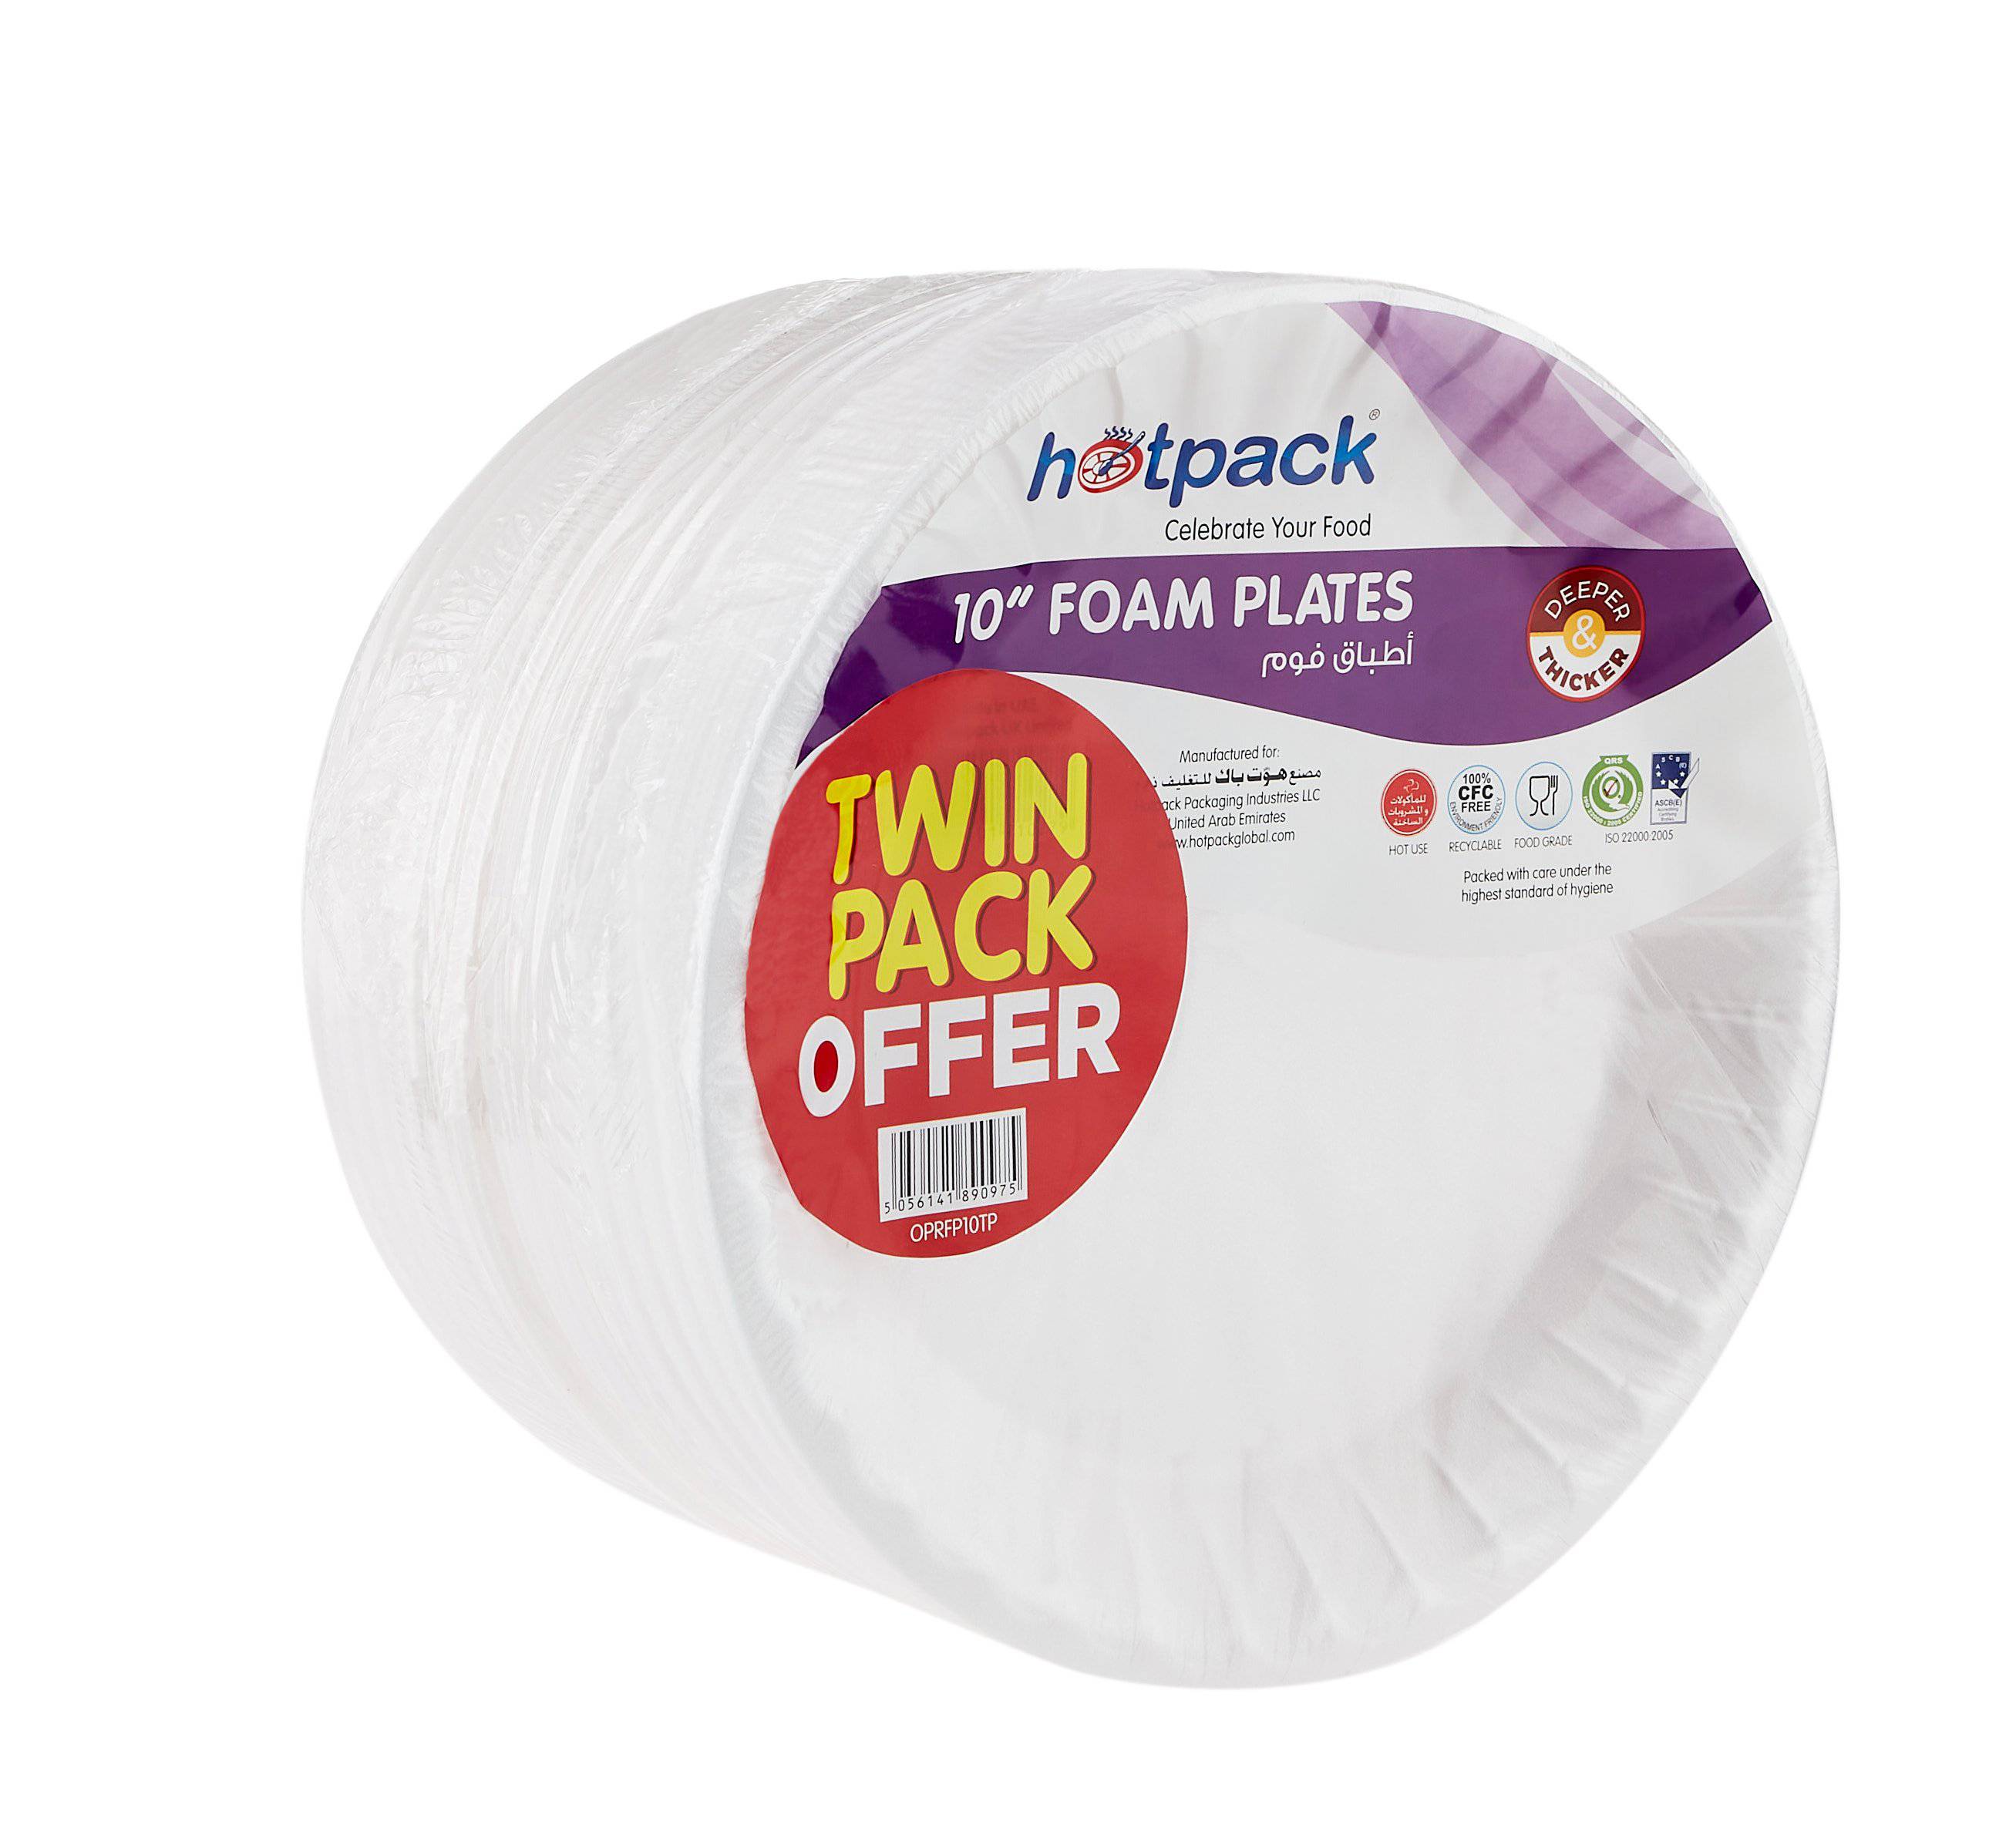 Round Foam Plate 10 Inch Buy One Get One Free 25 Pieces x 2 Packets - Hotpack Global